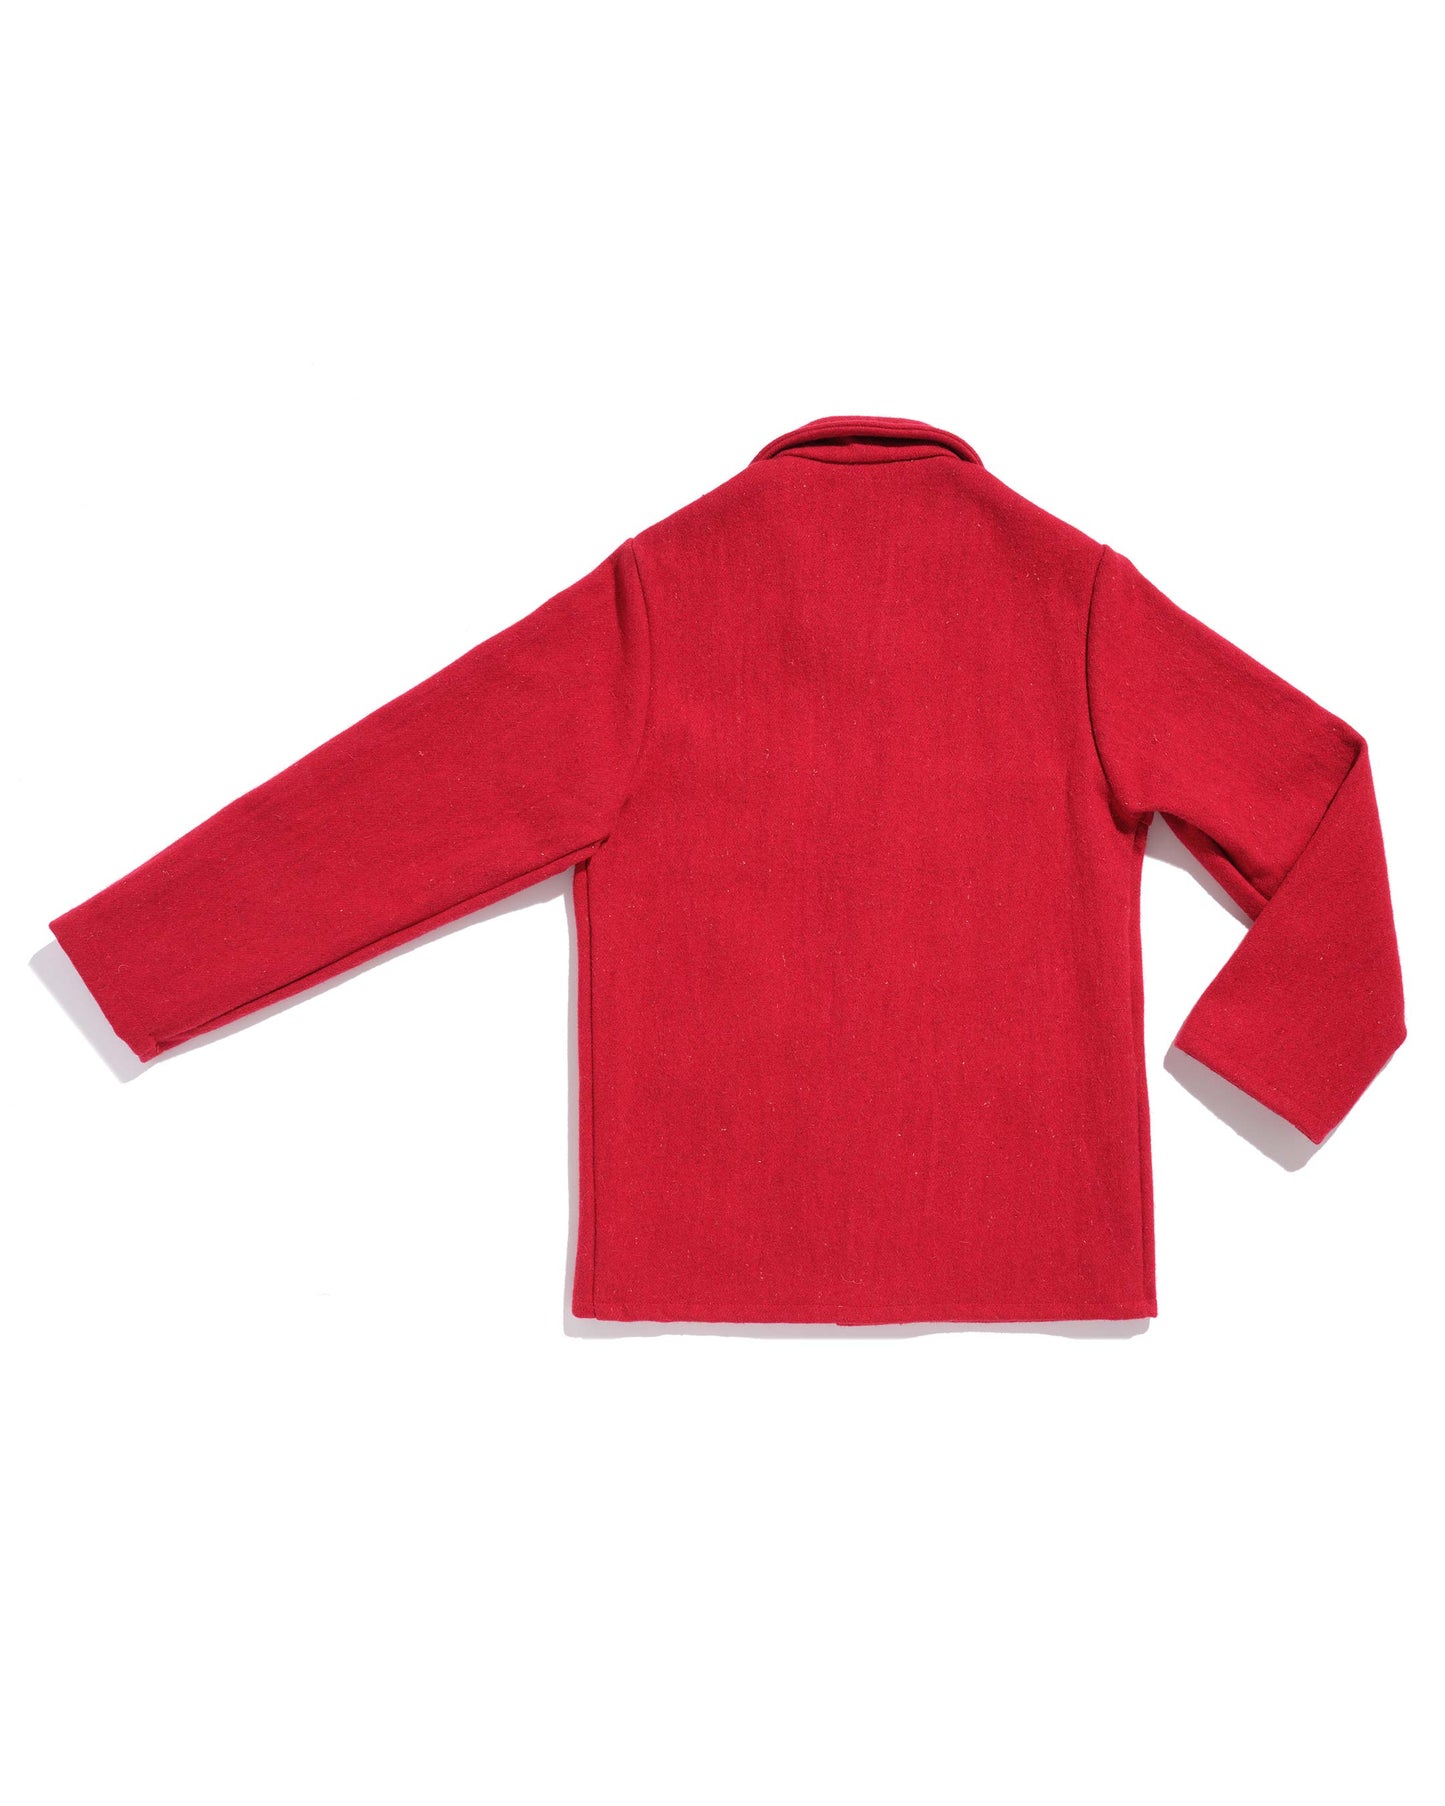 Le Laboureur red wool jacket